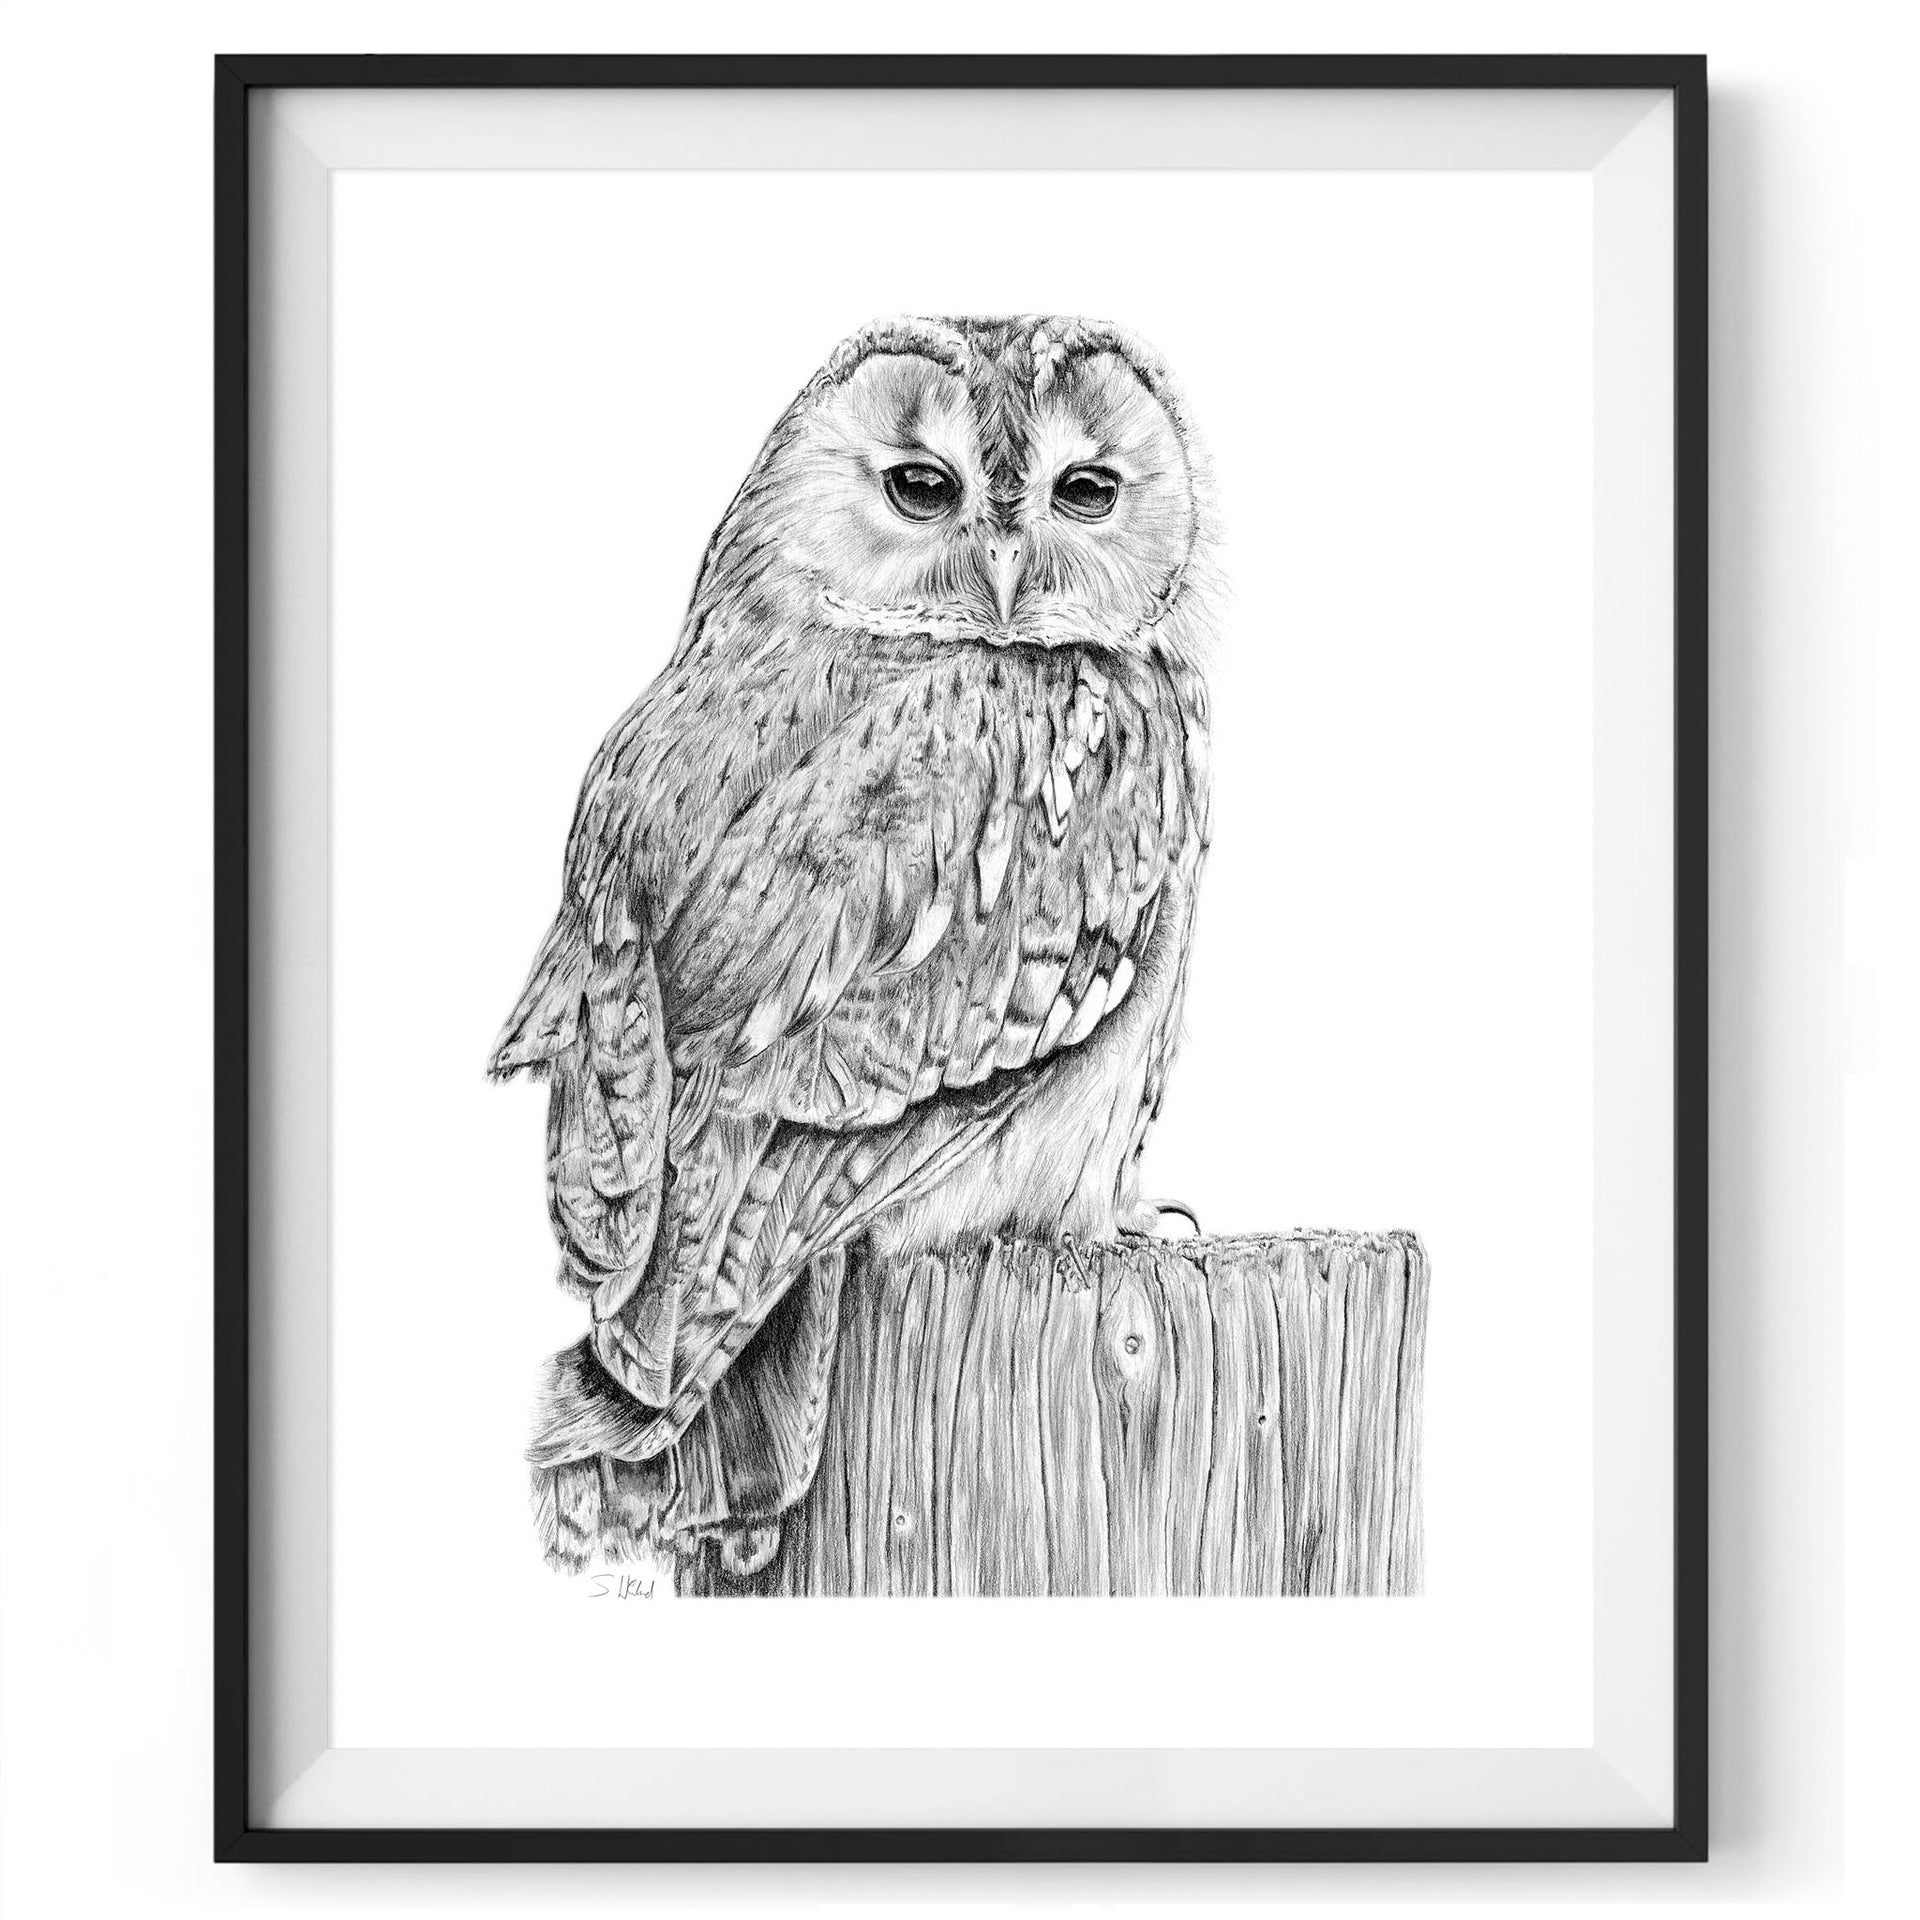 Owl pencil drawing print in frame